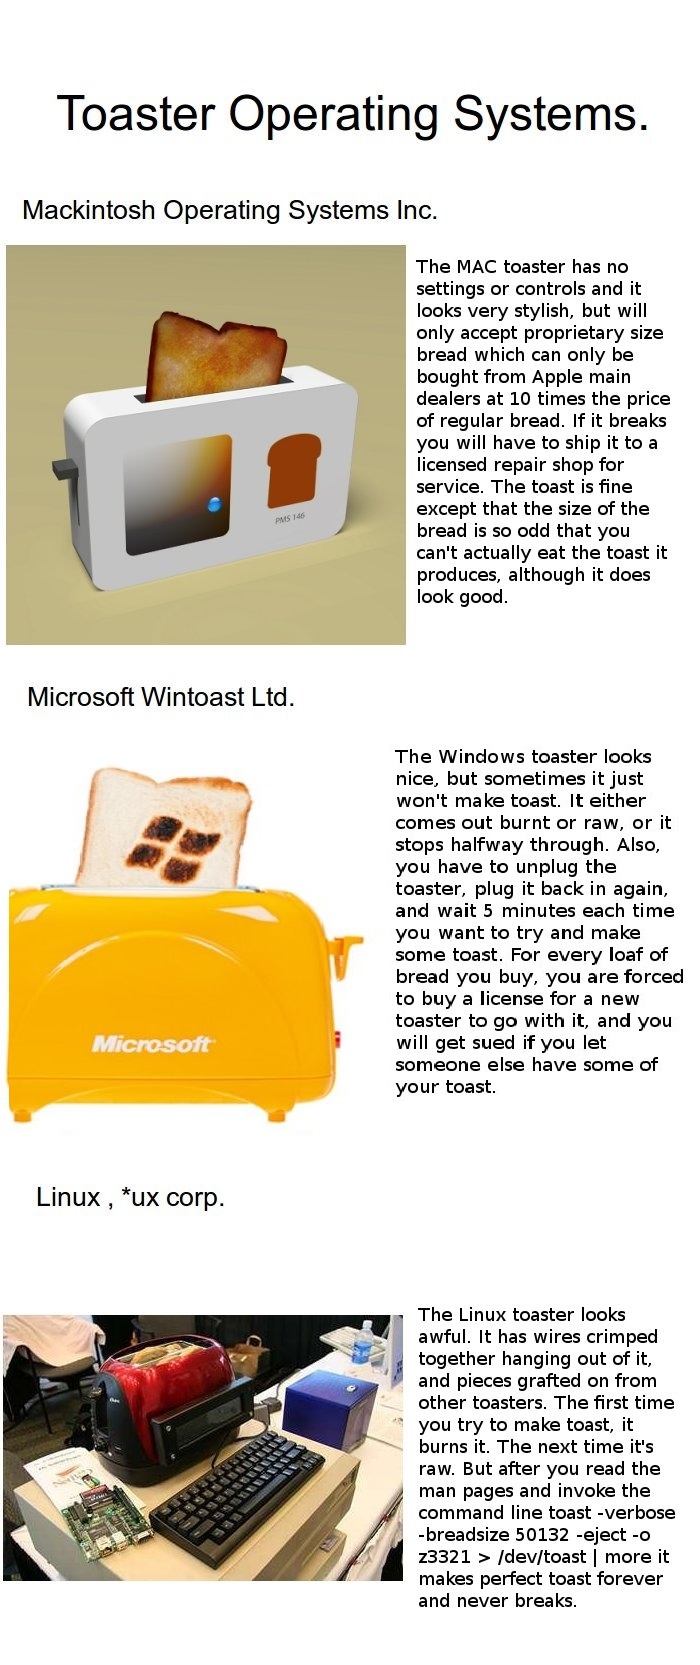 Toaster operating systems